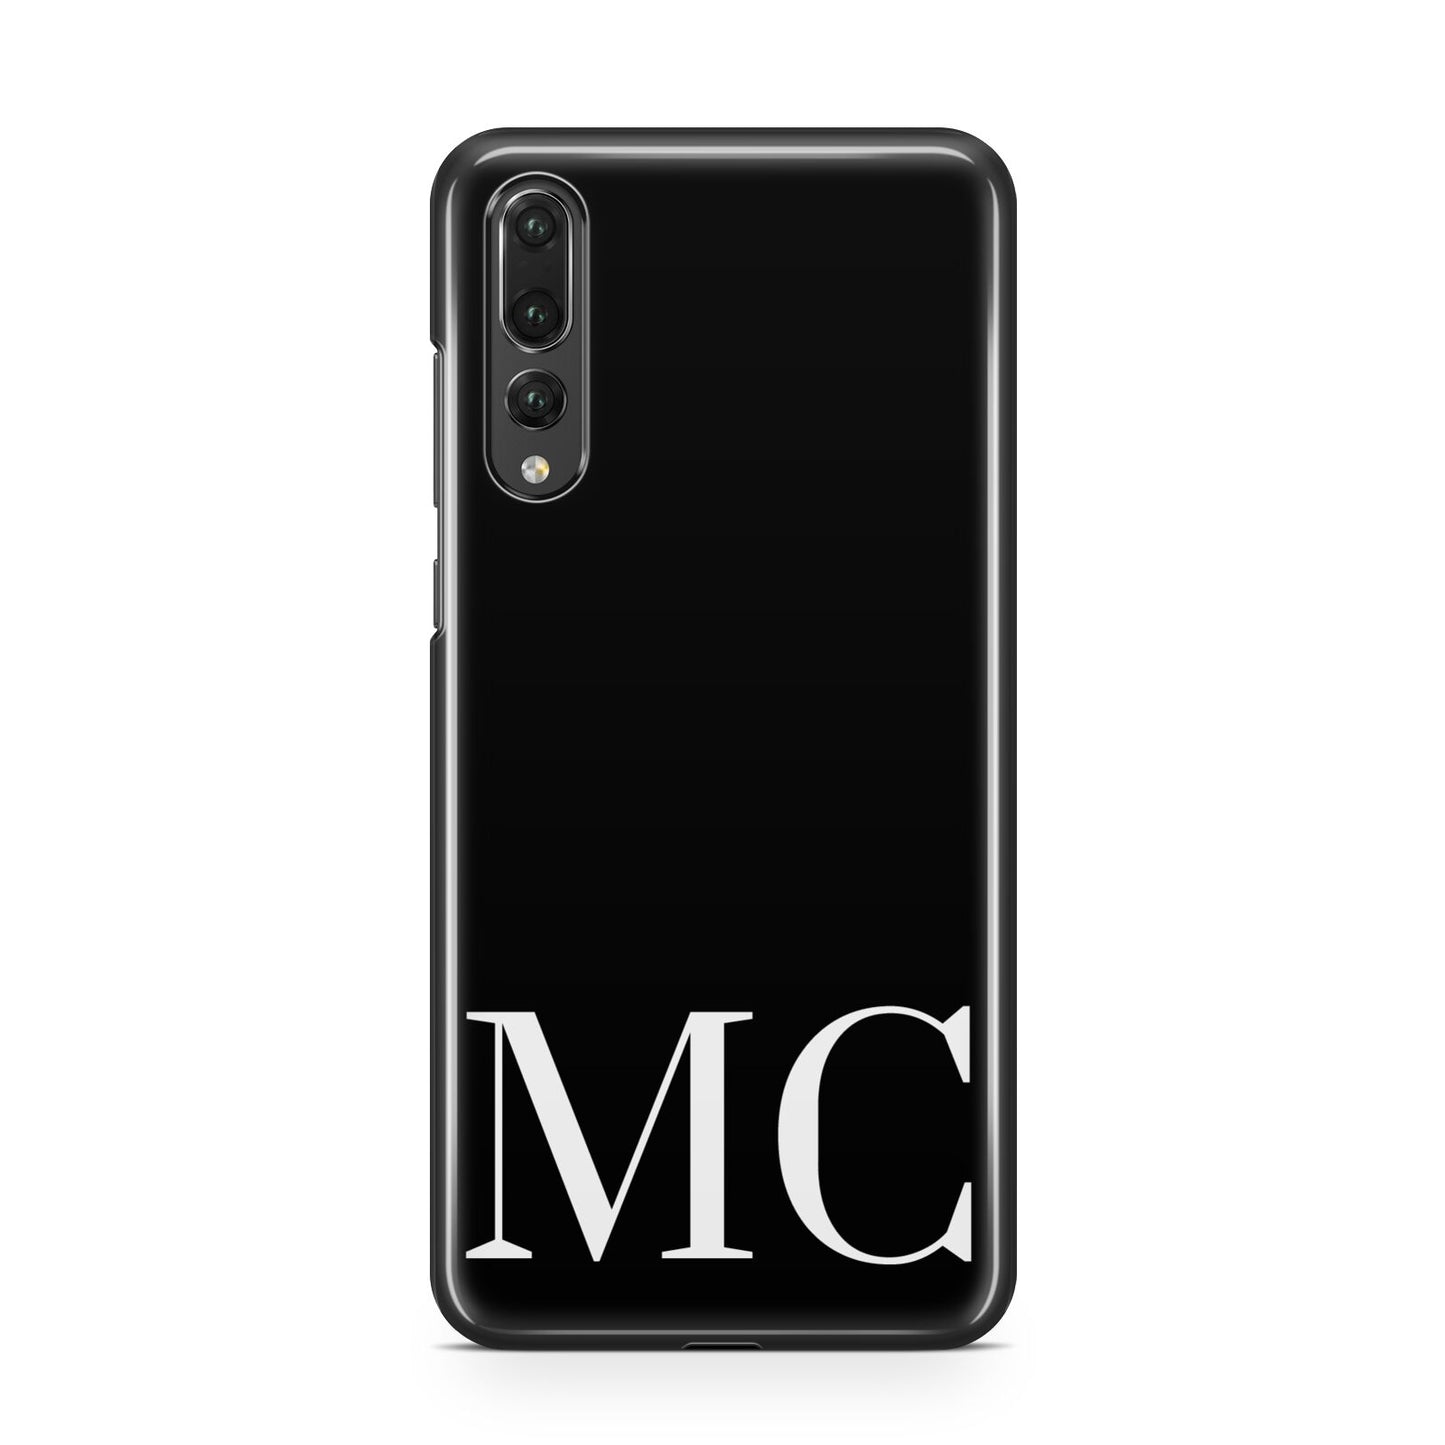 Initials Personalised 1 Huawei P20 Pro Phone Case